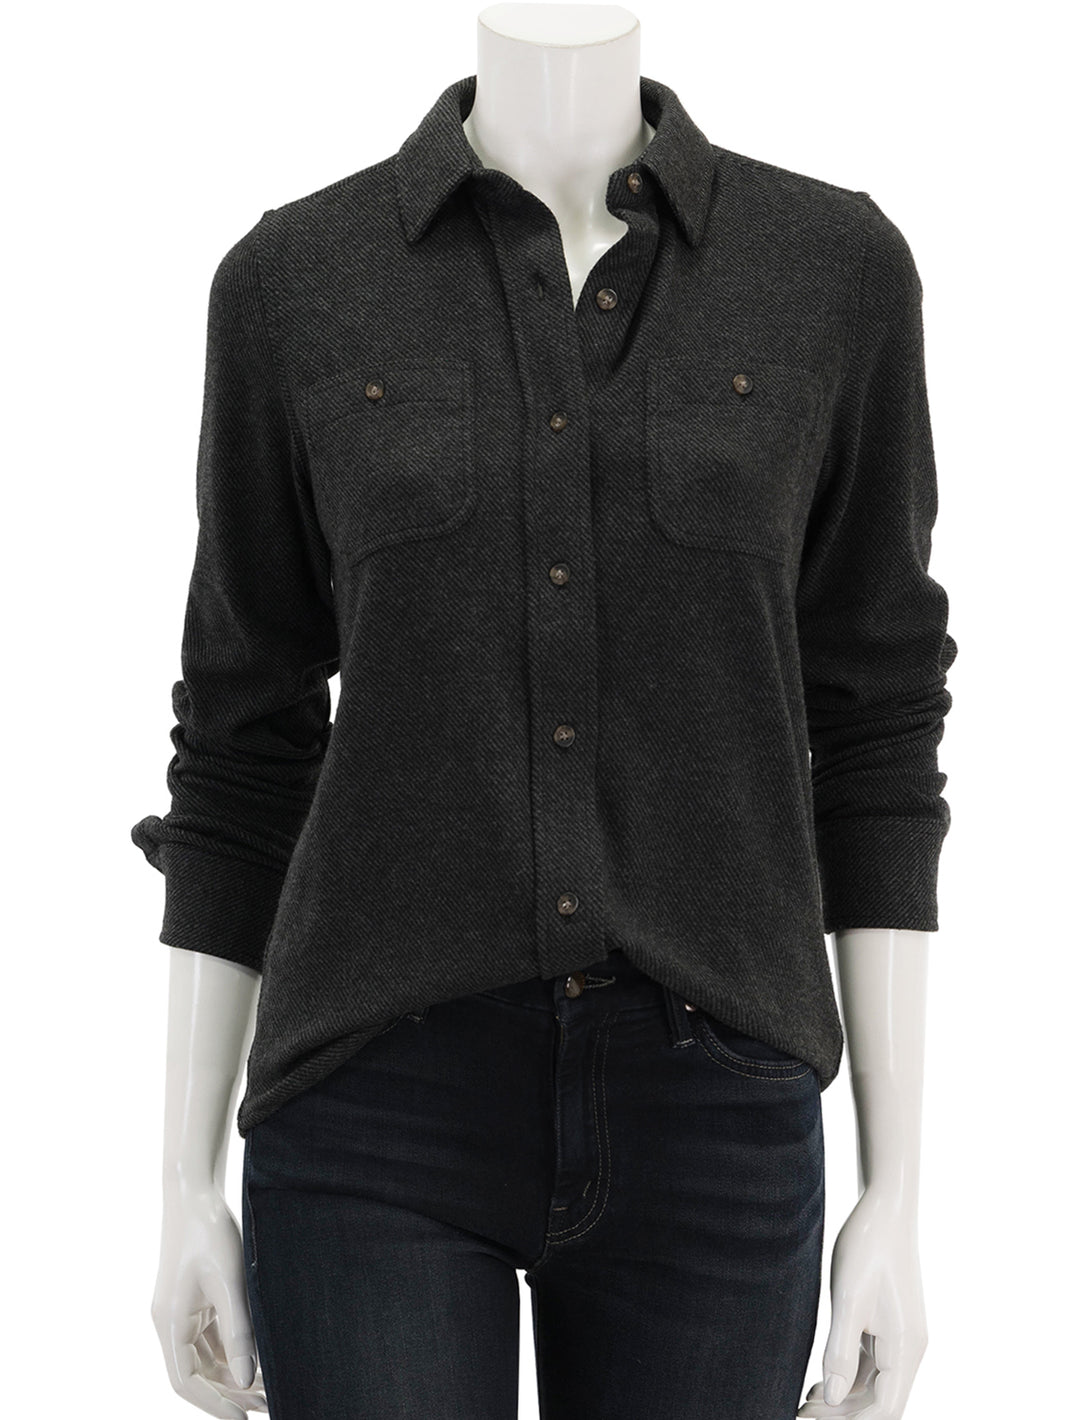 Front view of Faherty's legend sweater shirt in heathered black twill.